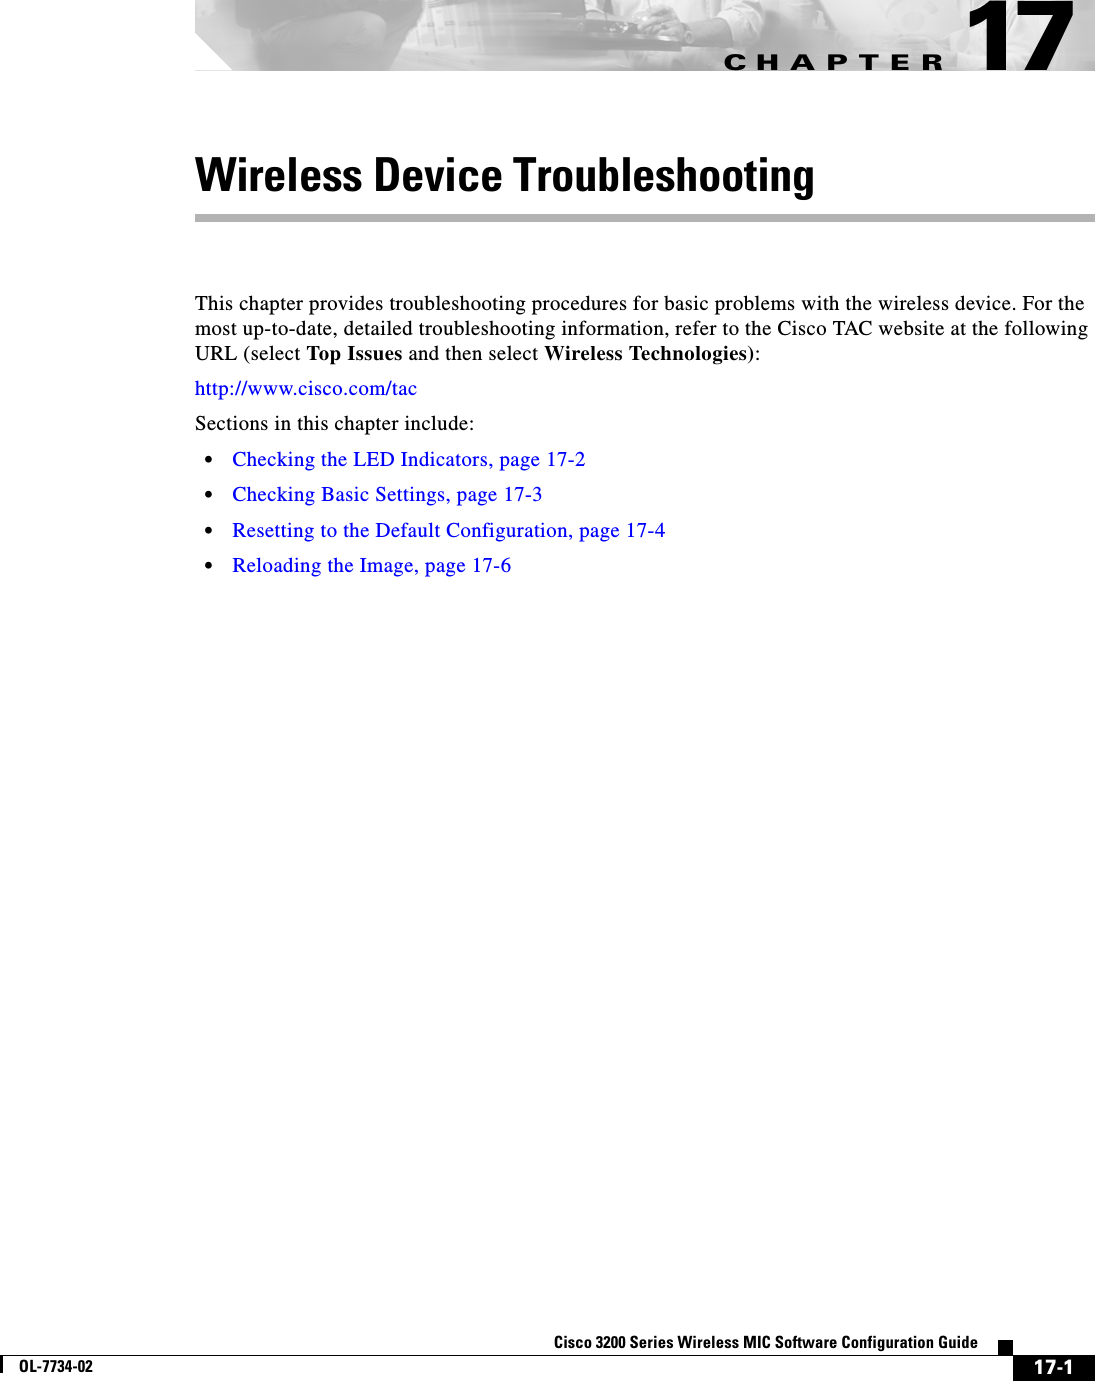 CHAPTER17-1Cisco 3200 Series Wireless MIC Software Configuration GuideOL-7734-0217Wireless Device TroubleshootingThis chapter provides troubleshooting procedures for basic problems with the wireless device. For the most up-to-date, detailed troubleshooting information, refer to the Cisco TAC website at the following URL (select Top Issues and then select Wireless Technologies):http://www.cisco.com/tac Sections in this chapter include:•Checking the LED Indicators, page 17-2•Checking Basic Settings, page 17-3•Resetting to the Default Configuration, page 17-4•Reloading the Image, page 17-6